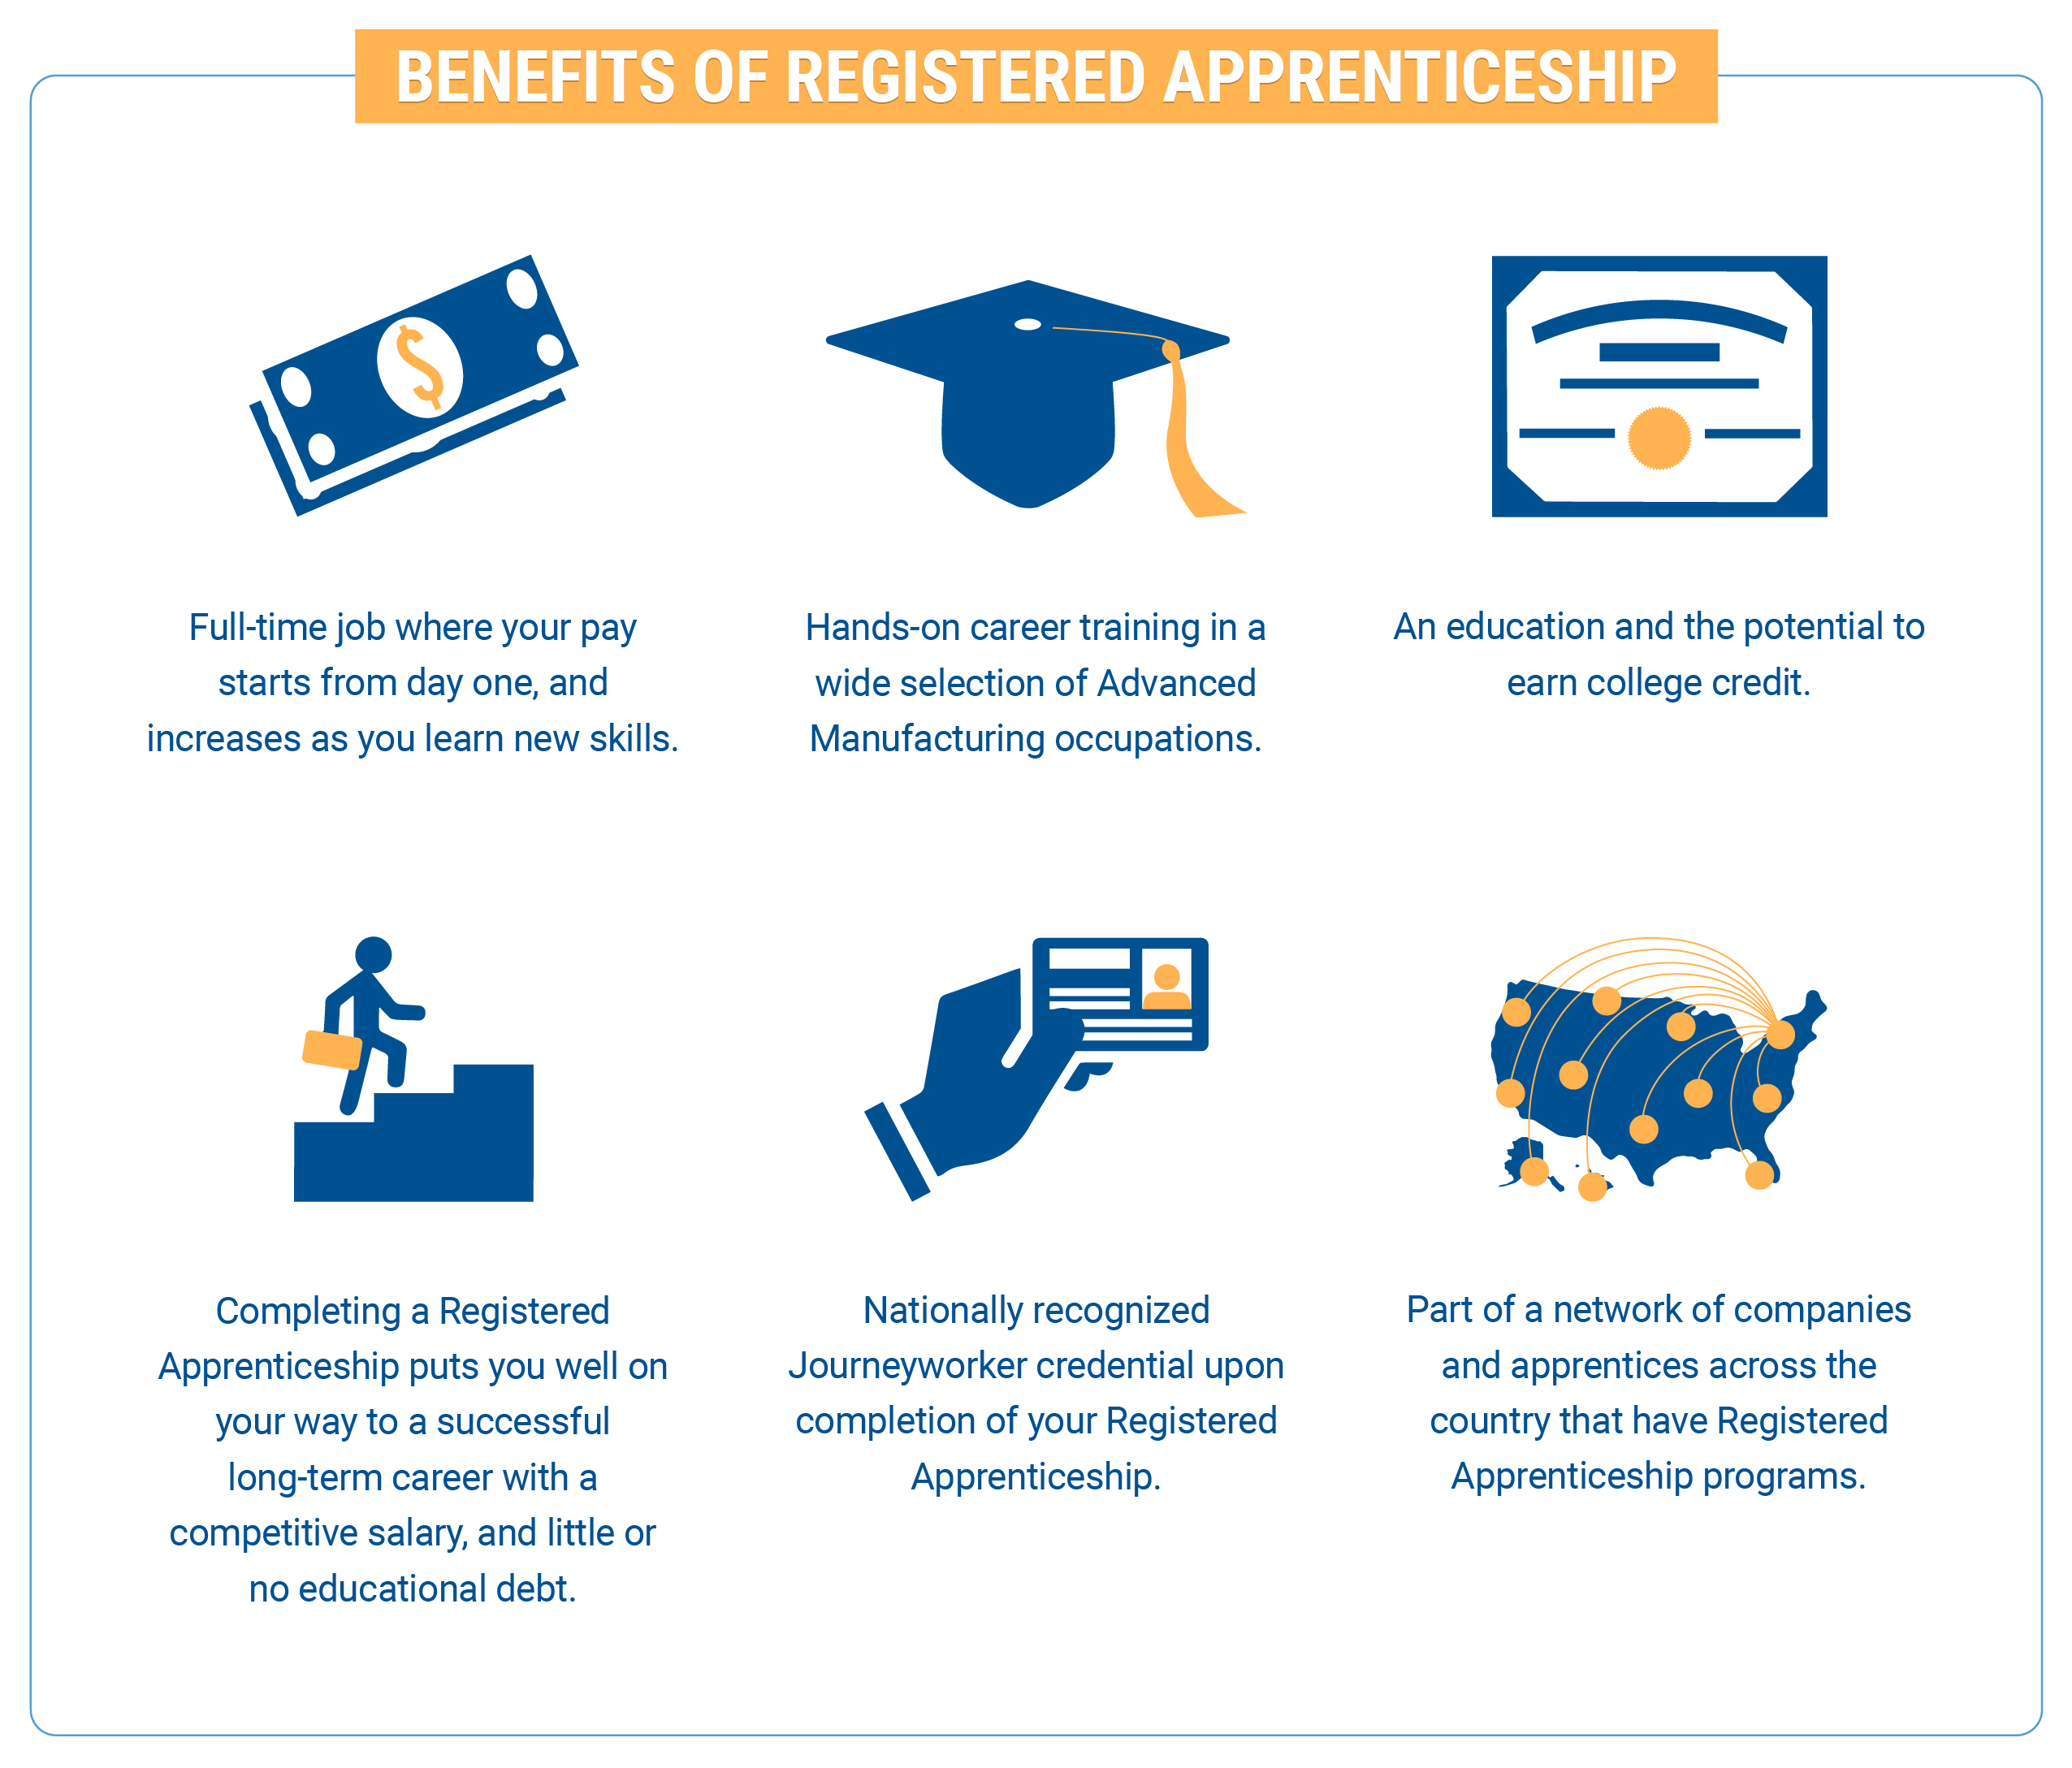 Benefits of Registered Apprenticeship: Full-time job where your pay starts from day one, and increases as you learn new skills. Hands-on career training in a wide selection of advanced manufacturing occupations. An education and the potential to earn college credit. Completing a Registered Apprenticeship puts you well on your way to a successful long-term career with a competitive salary, and a little or no educational debt. Nationally recognized Journeywork credential upon completion of your Registered Apprenticeship. Lastly, Part of a network of companies and apprentices across the country that have registered Apprenticeship programs.   